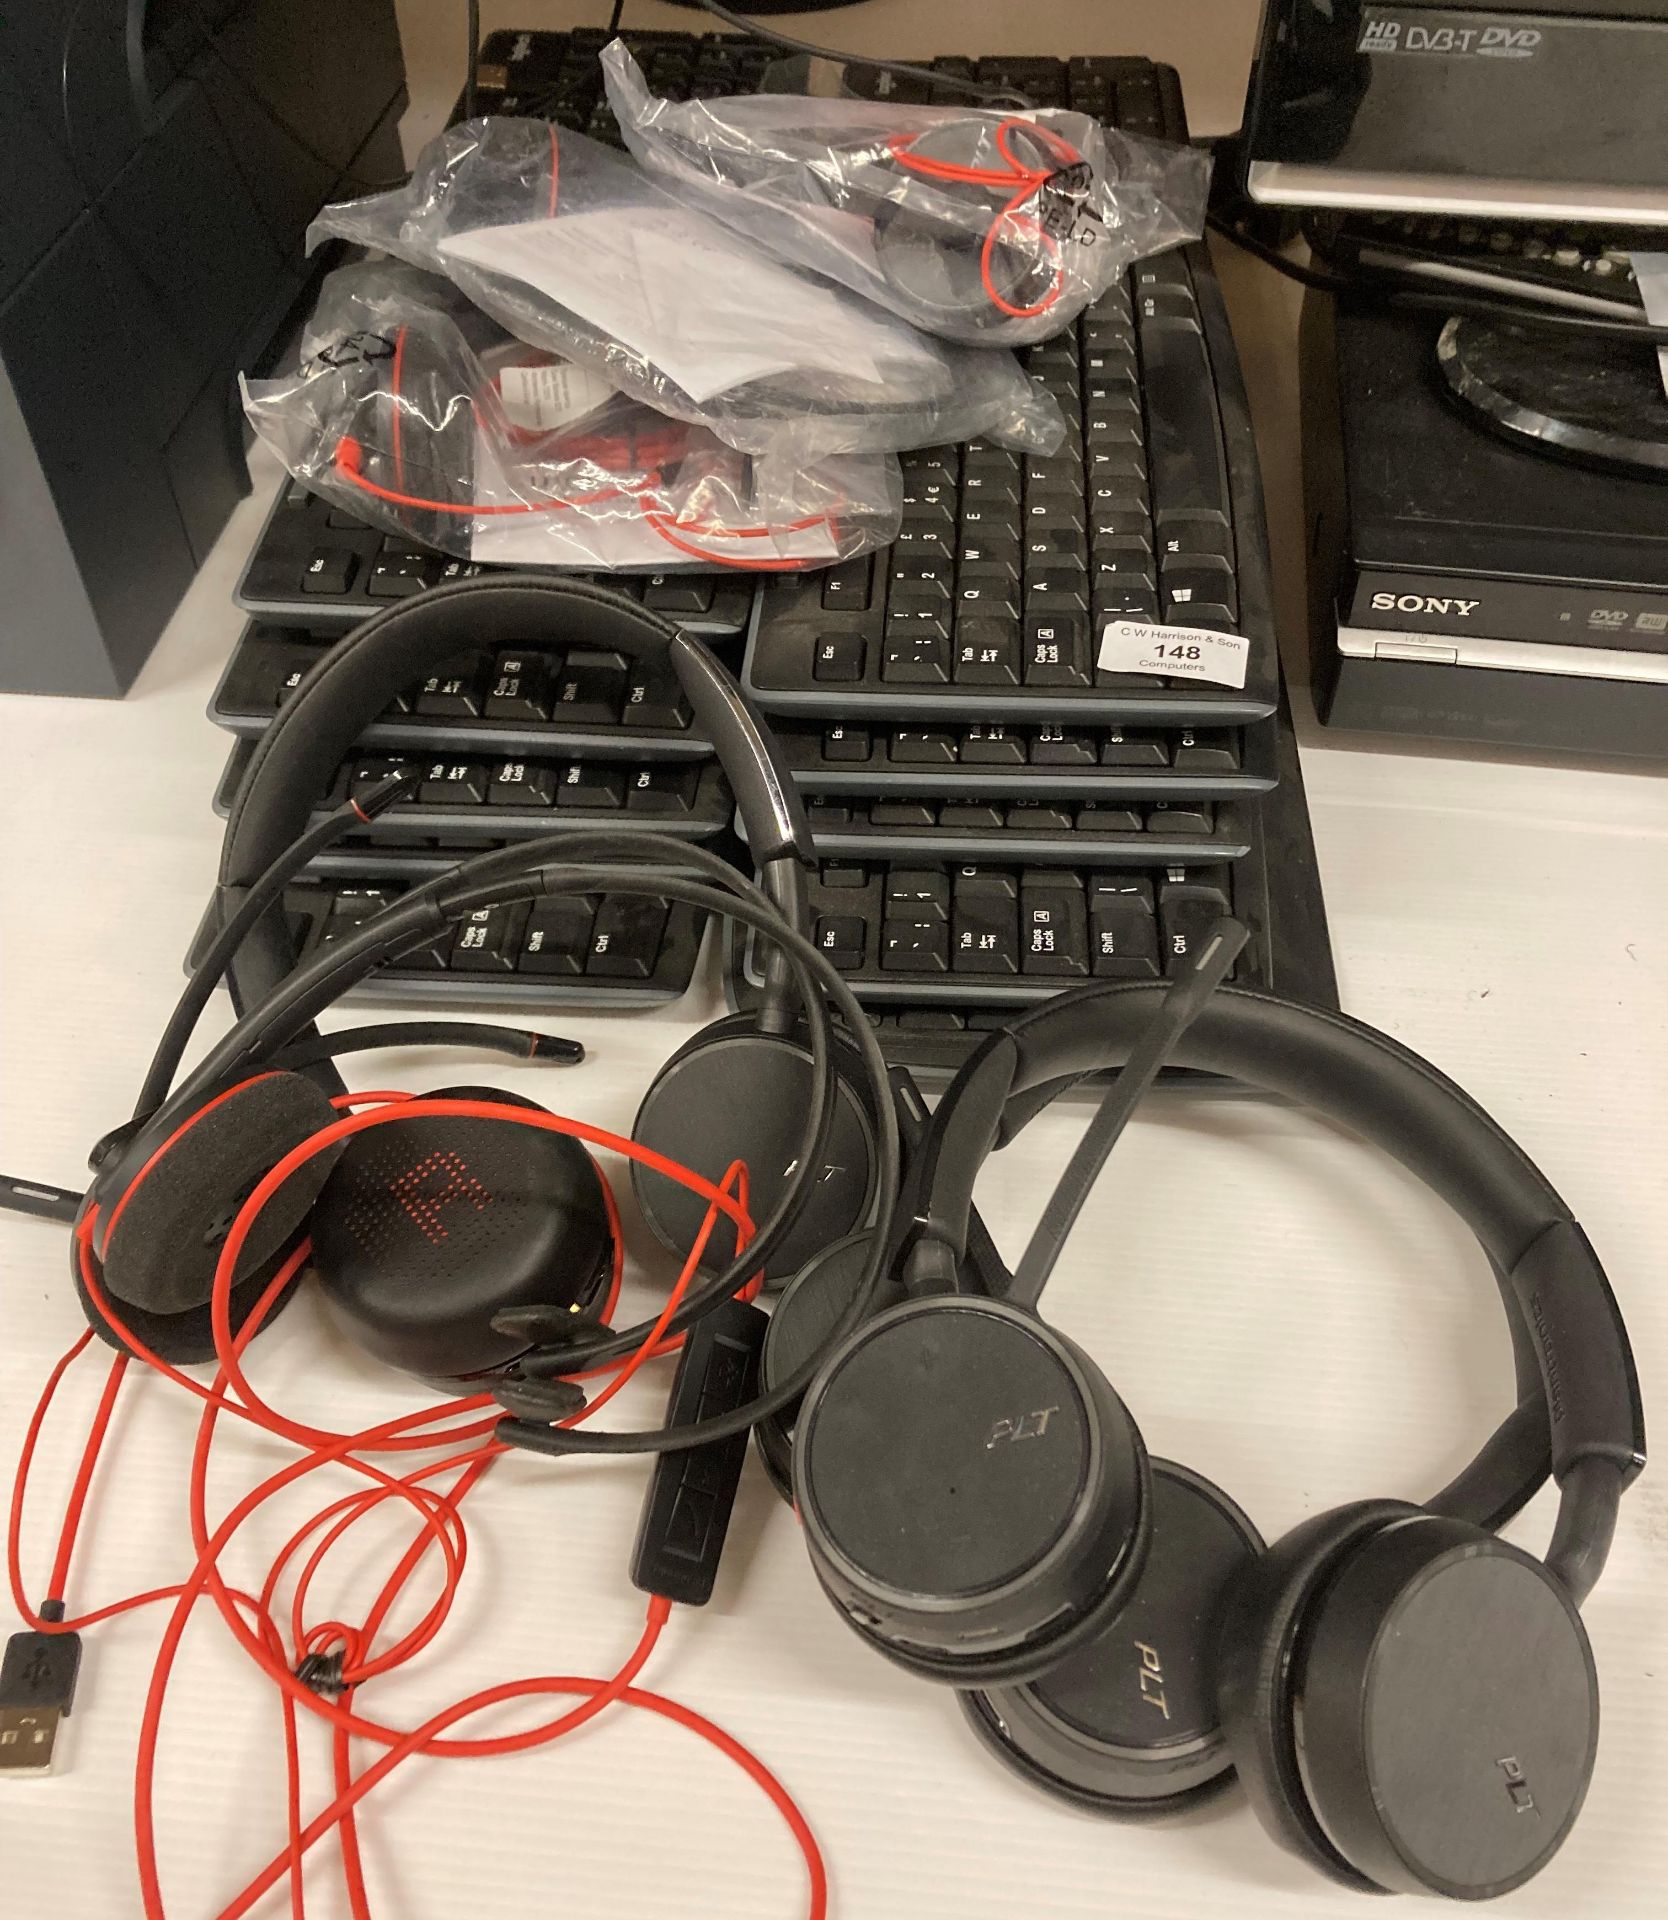 10 x Logitech wireless keyboards (as seen) and 8 x assorted Plantronics and PLT gaming headsets